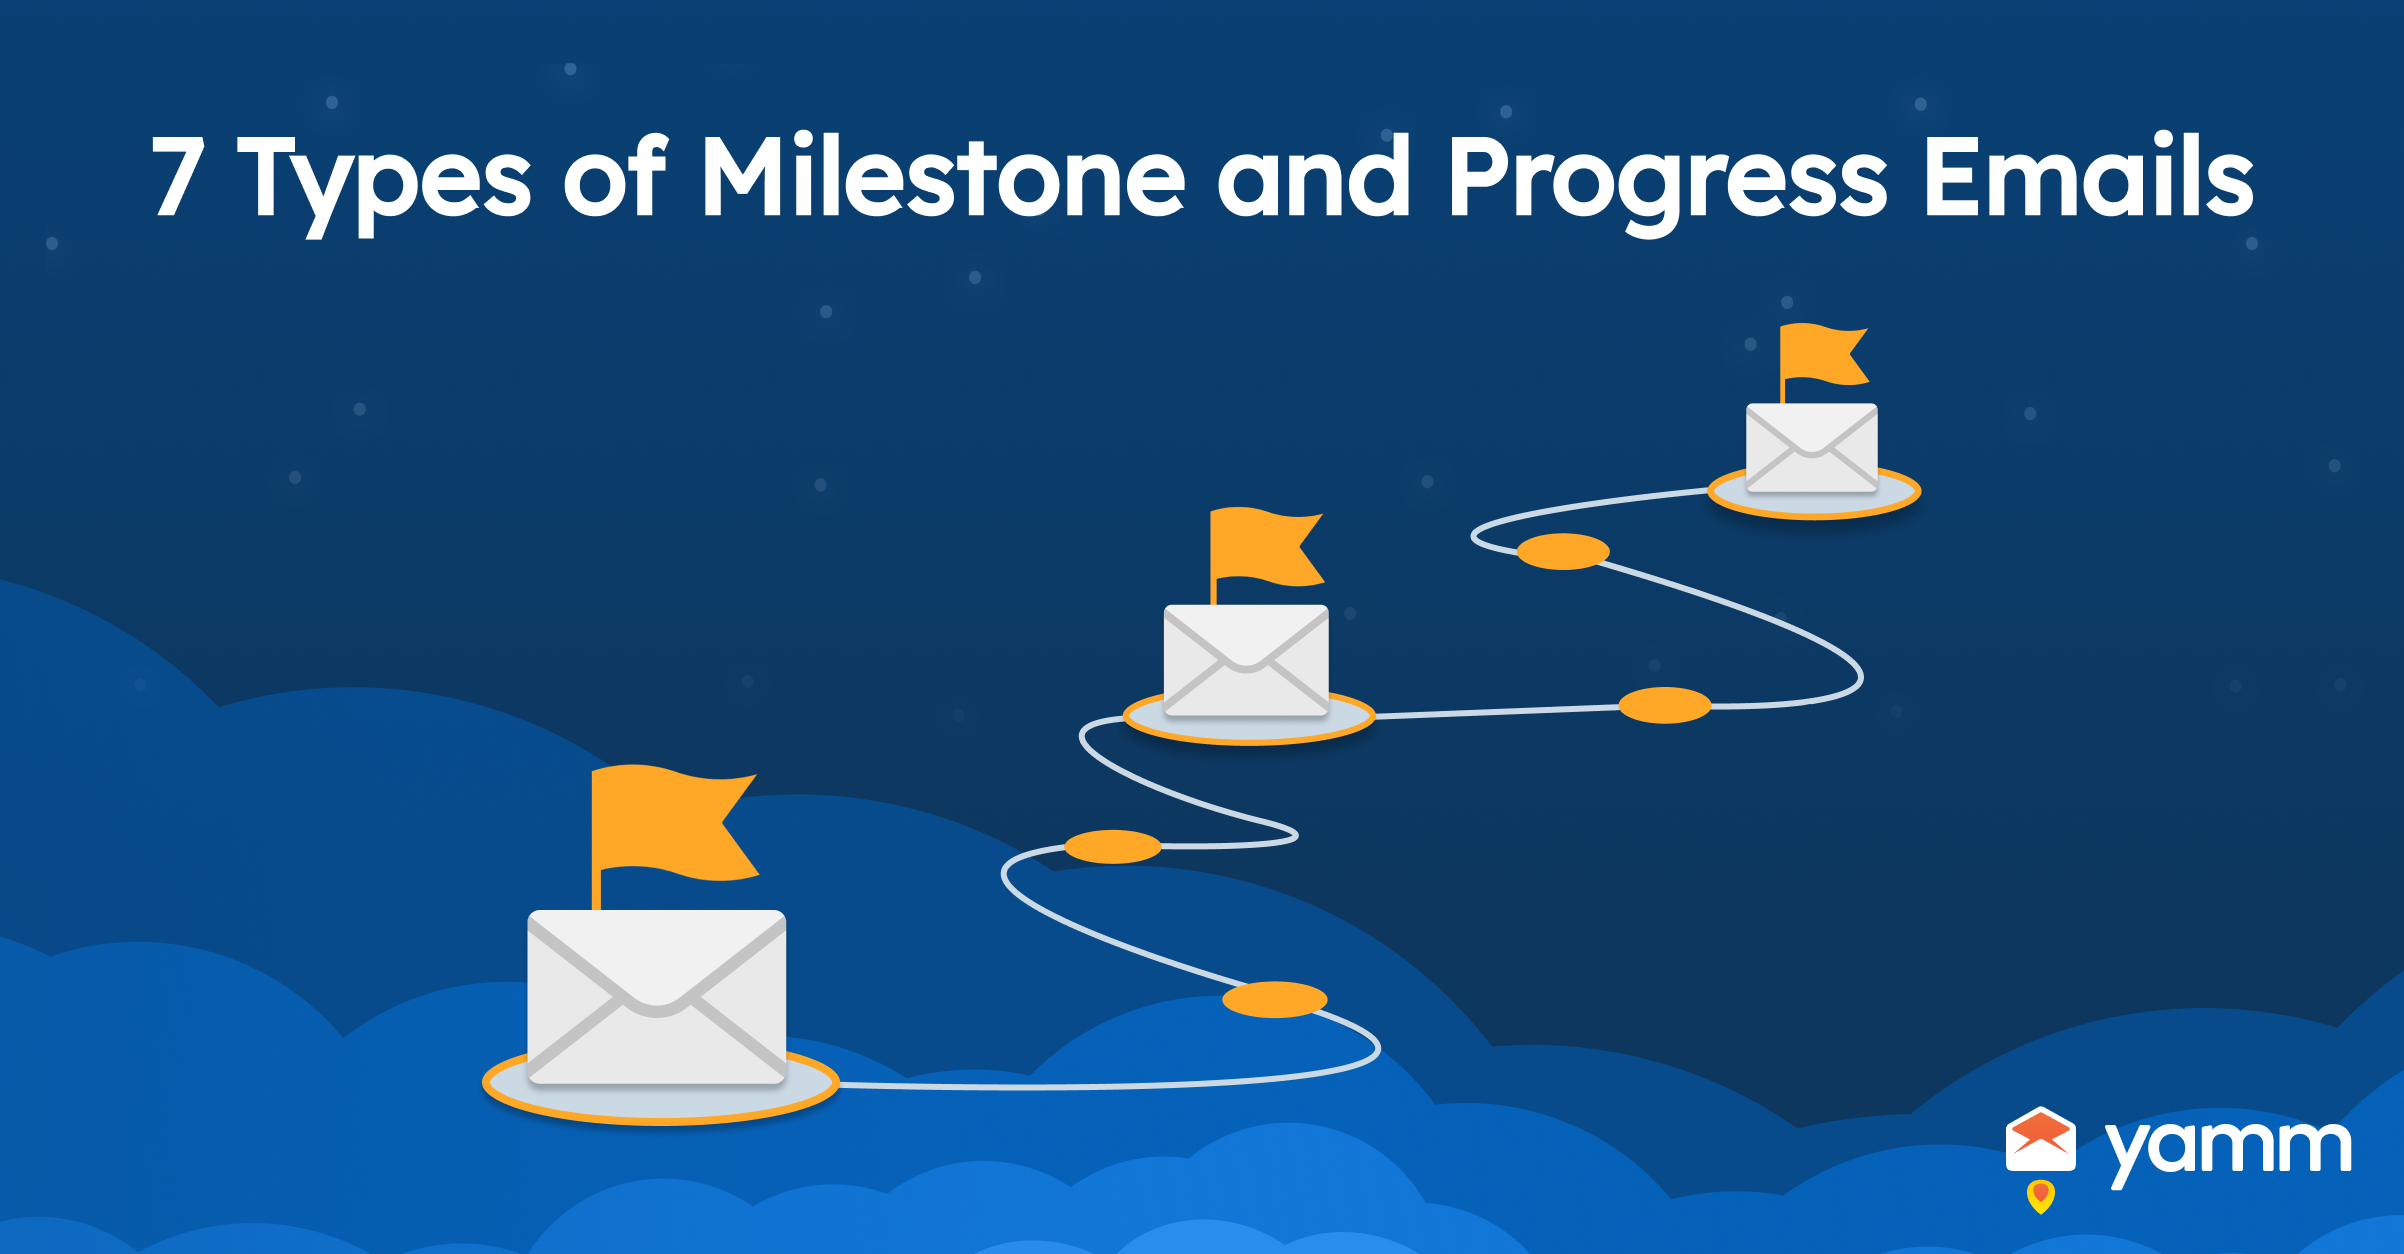 7 Types of Milestone and Progress Emails